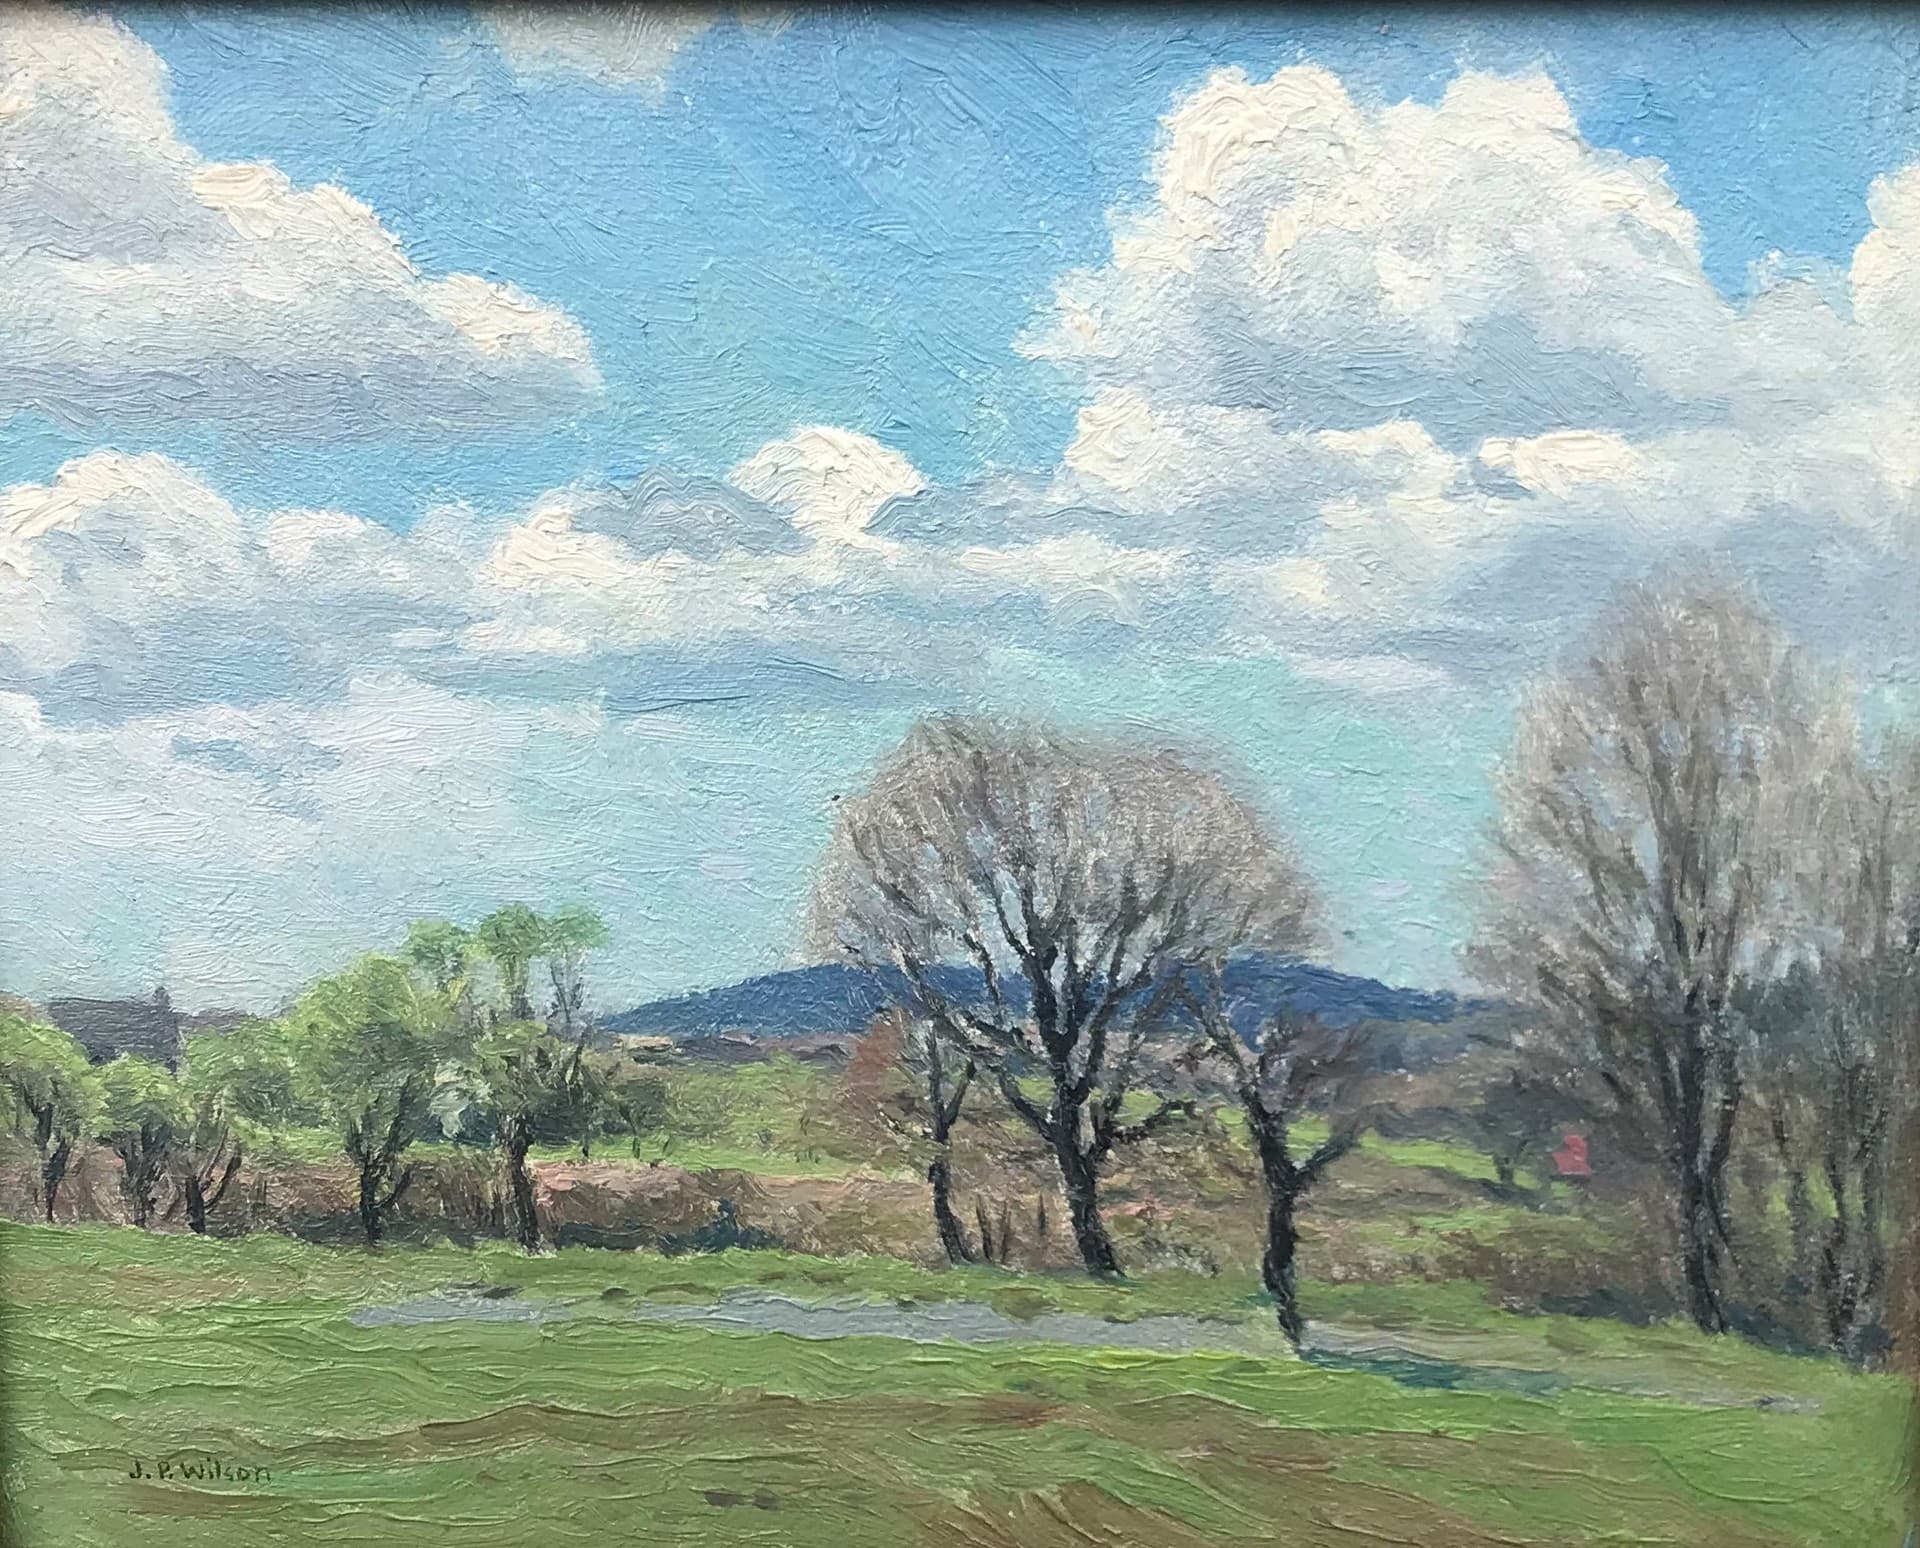 J. P. Wilson's Summer Landscape with Cloudy Sky